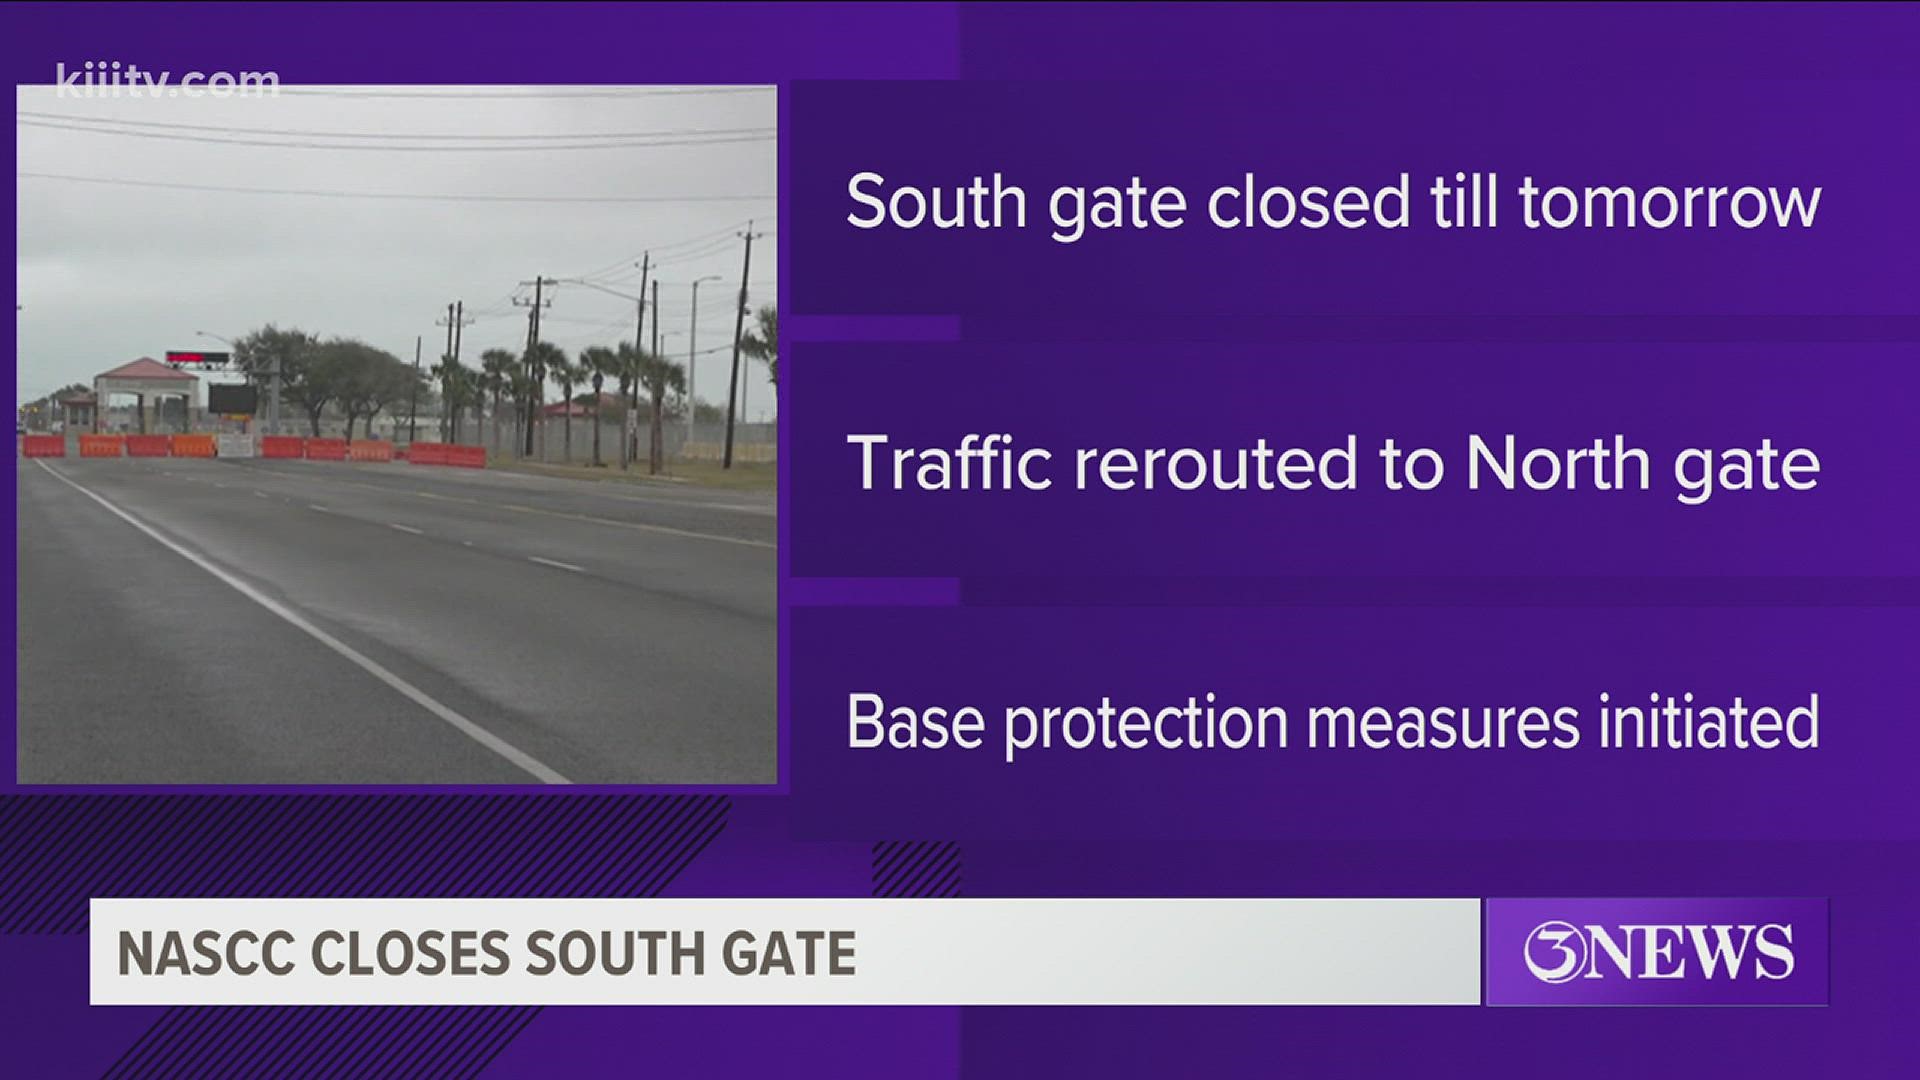 Officials say the main gate will reopen at 5:00 a.m., Jan. 25.